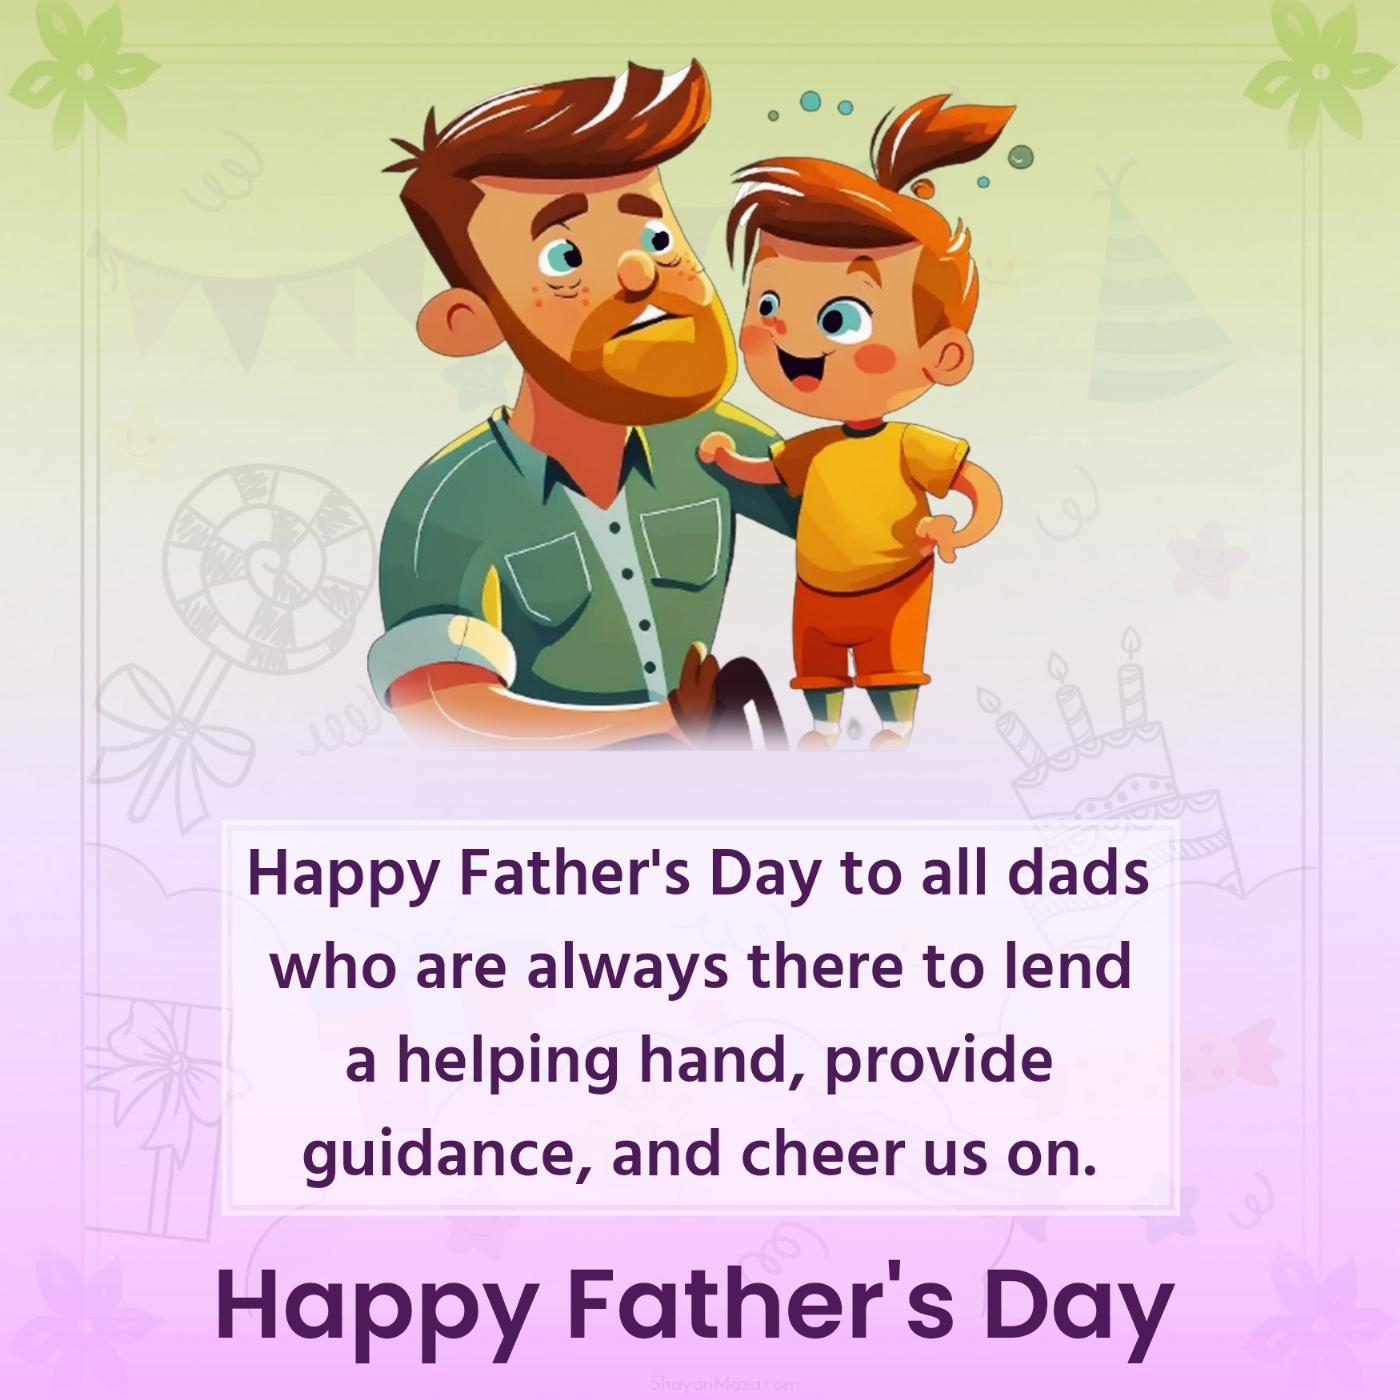 Happy Father's Day to all dads who are always there to lend a helping hand